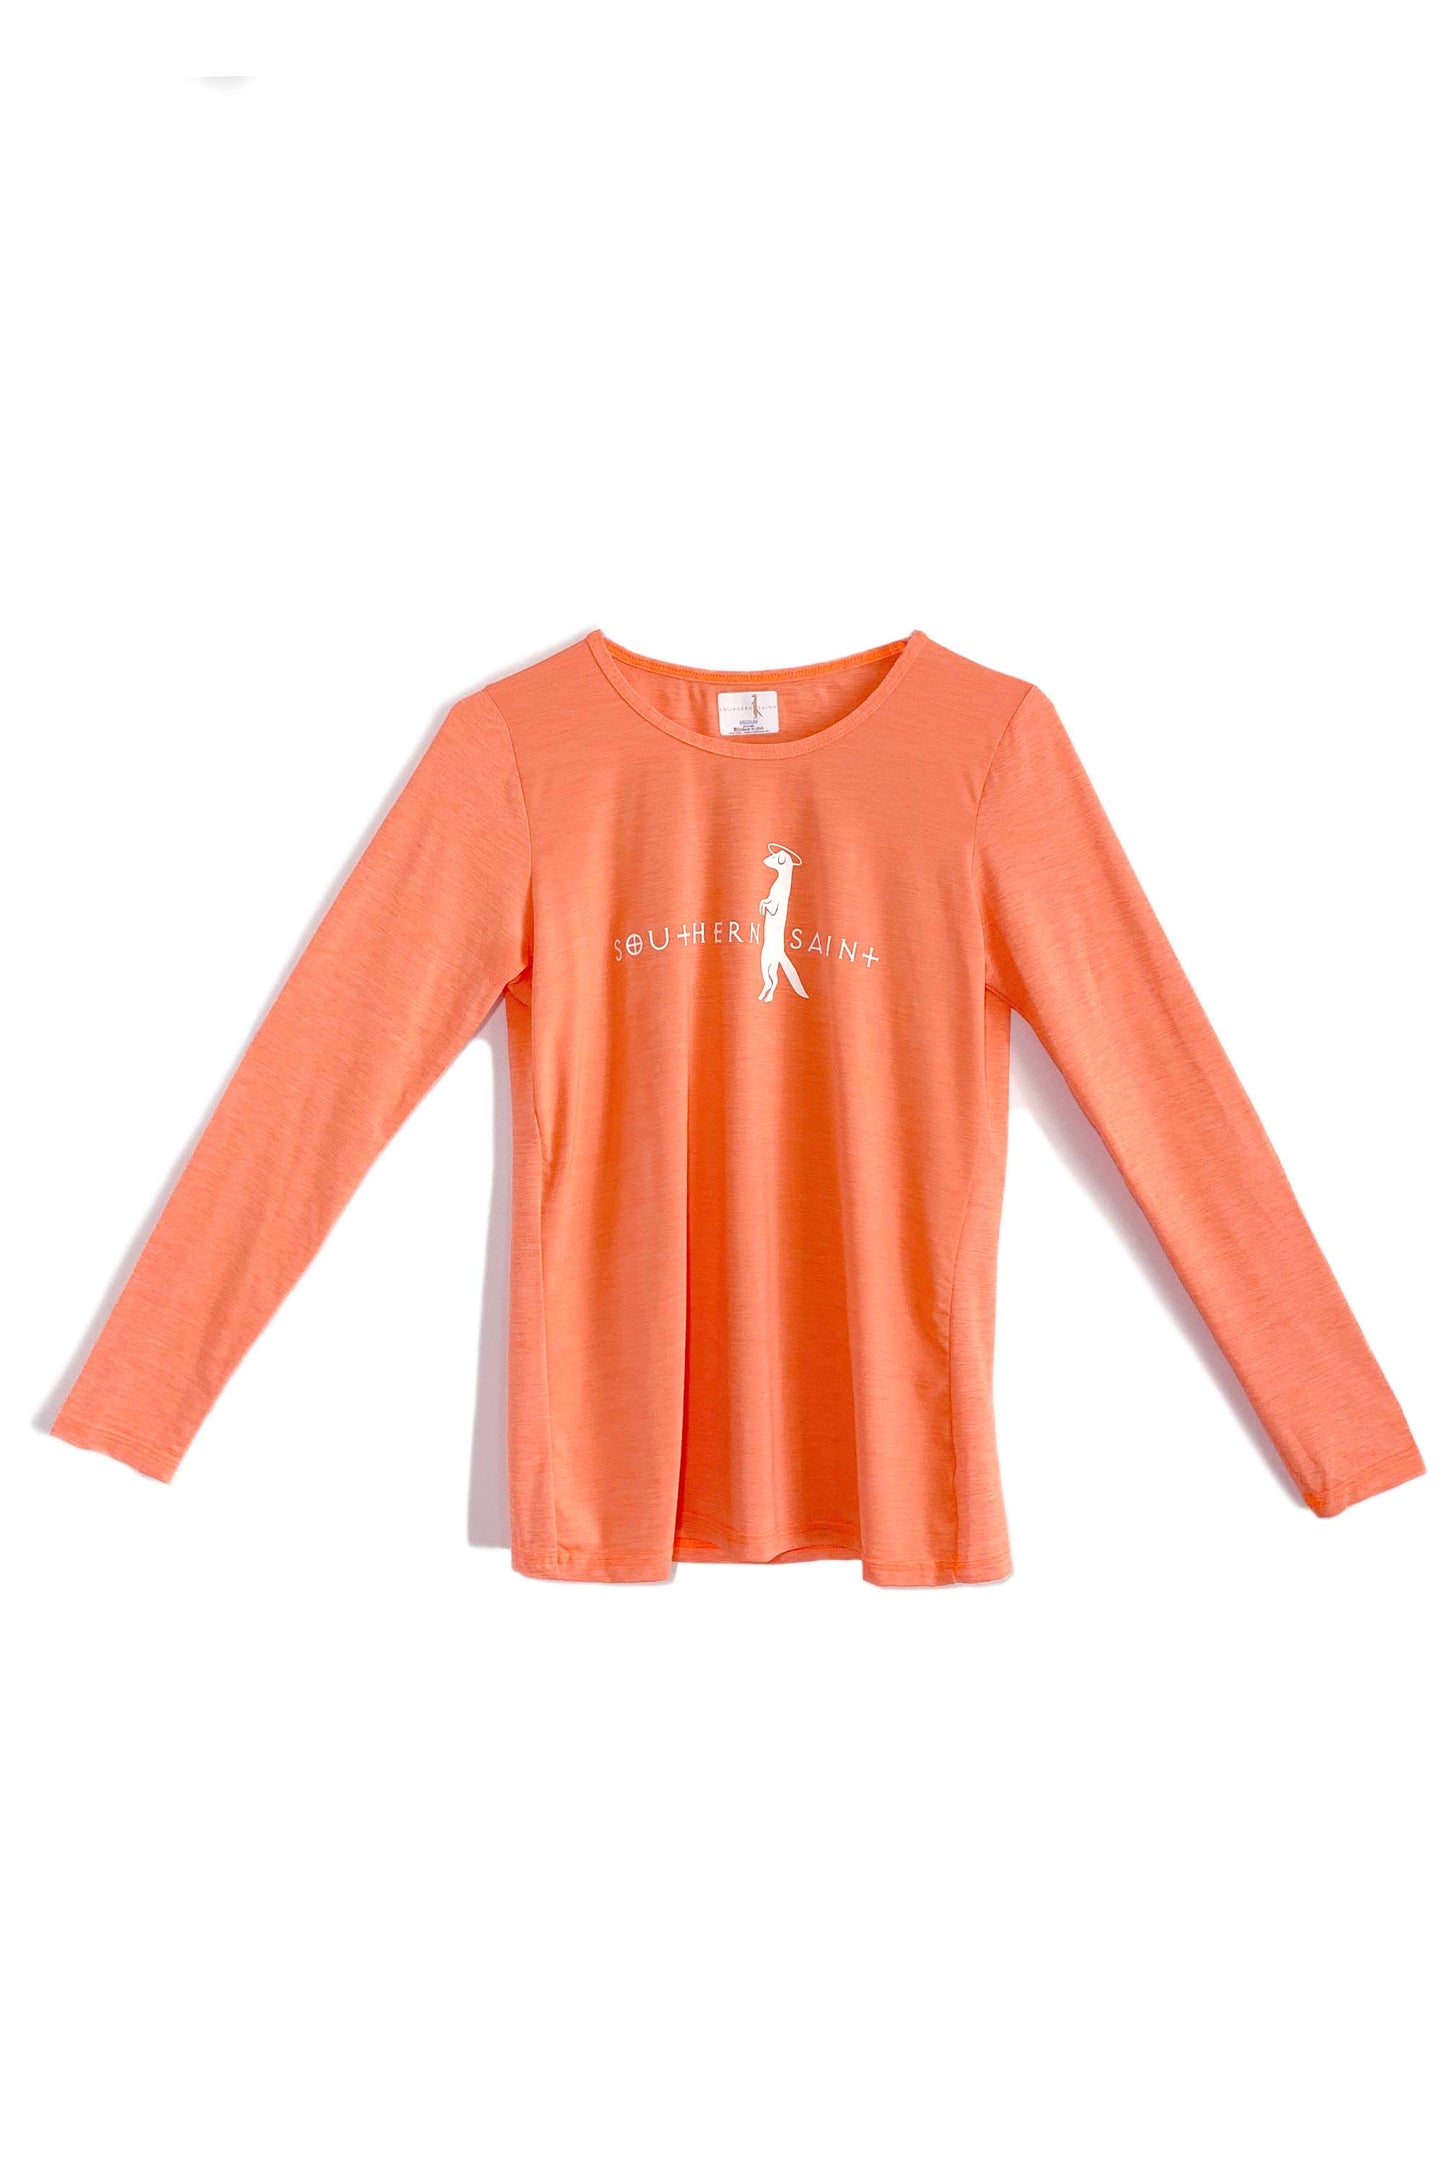 Men's Relaxed Fit Sun Shirt | Coral